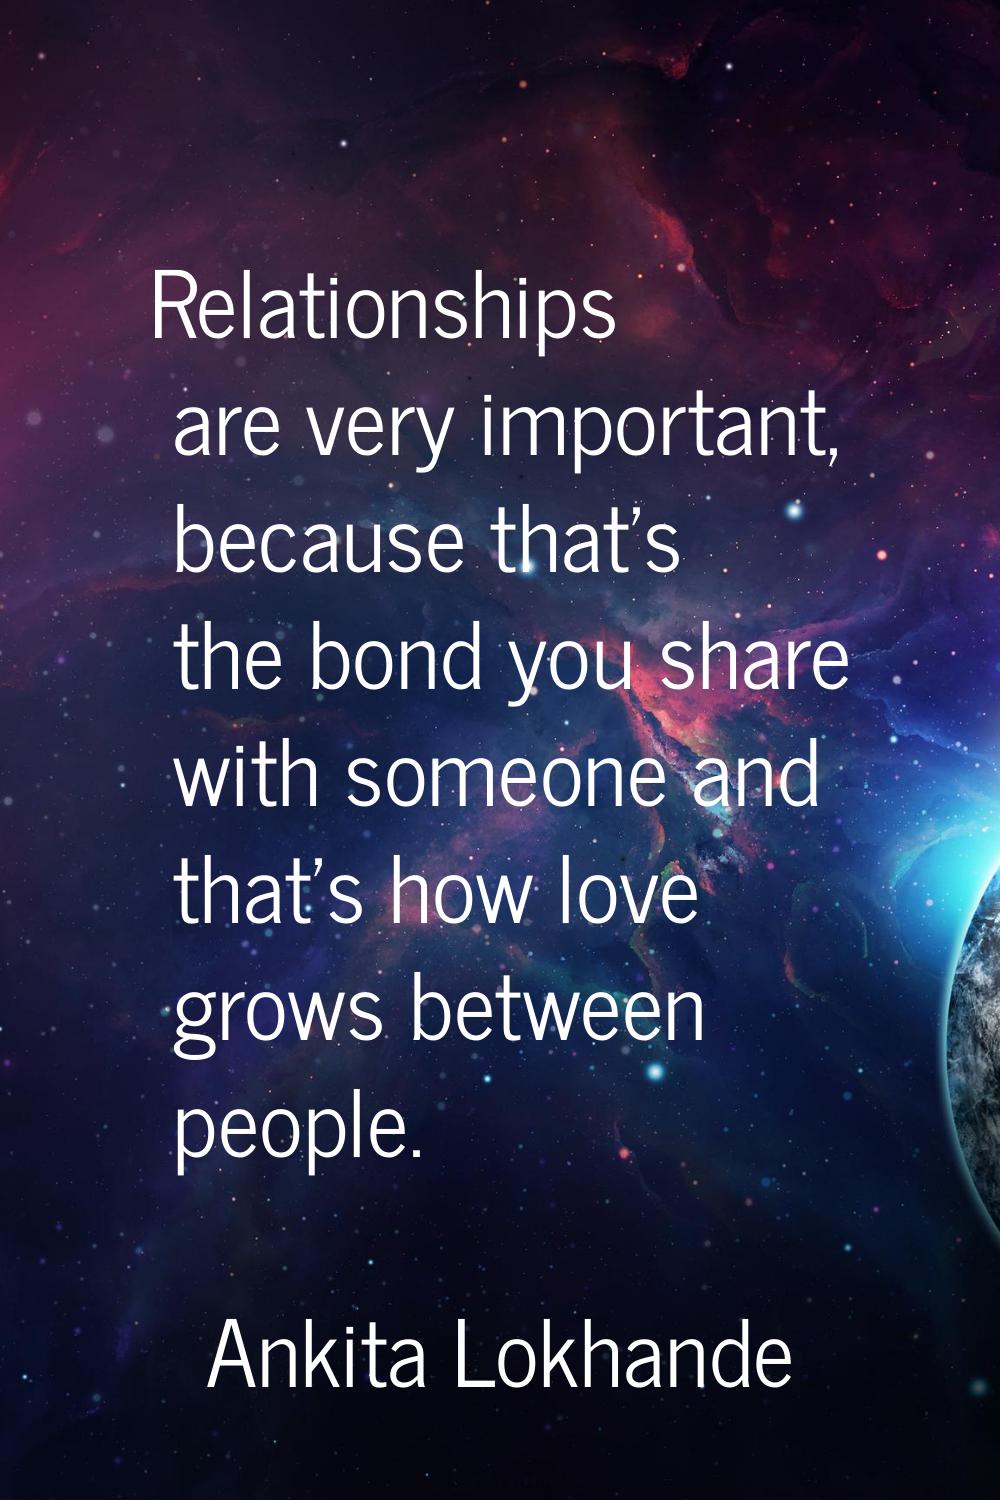 Relationships are very important, because that's the bond you share with someone and that's how lov